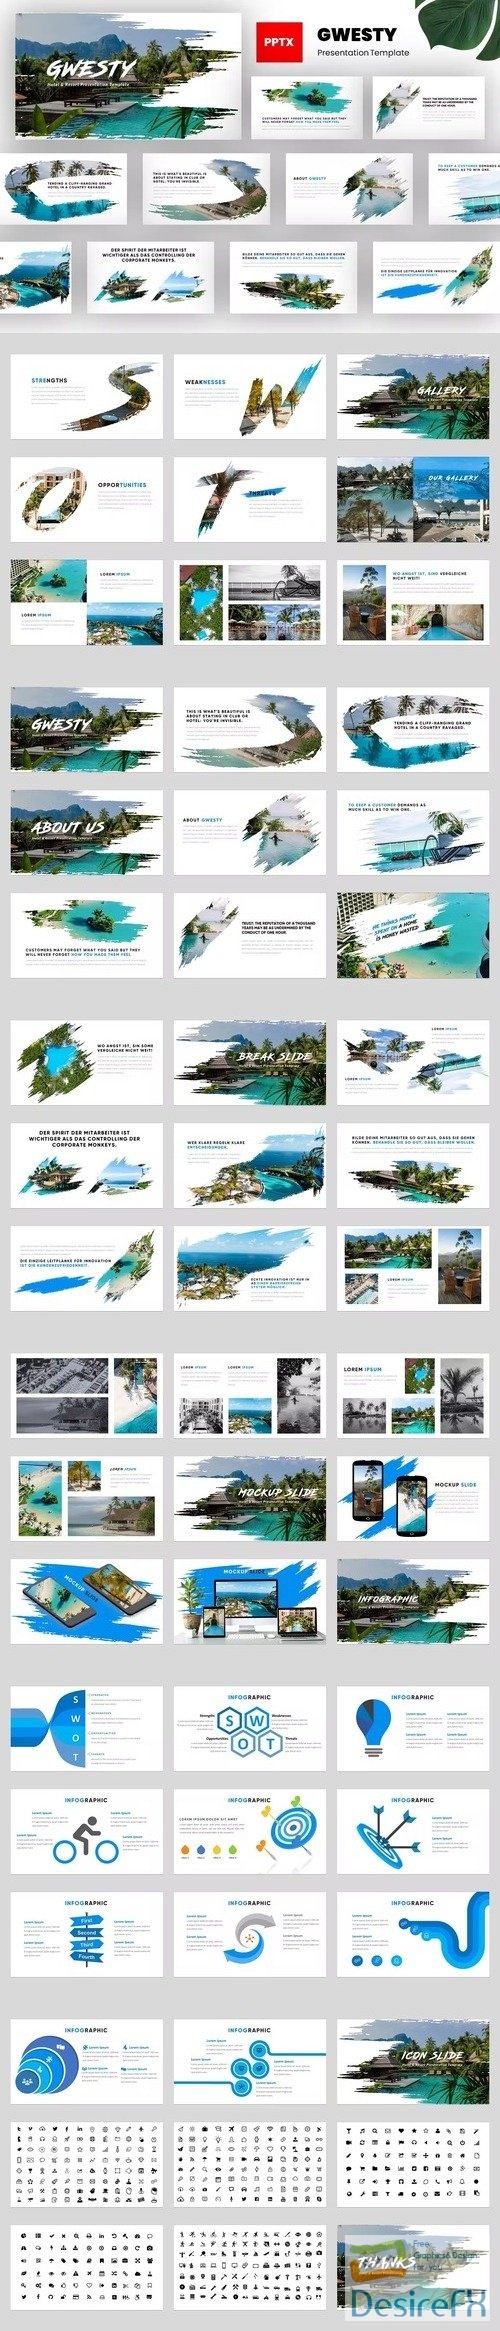 Gwesty - Hotel and Resort Powerpoint Template